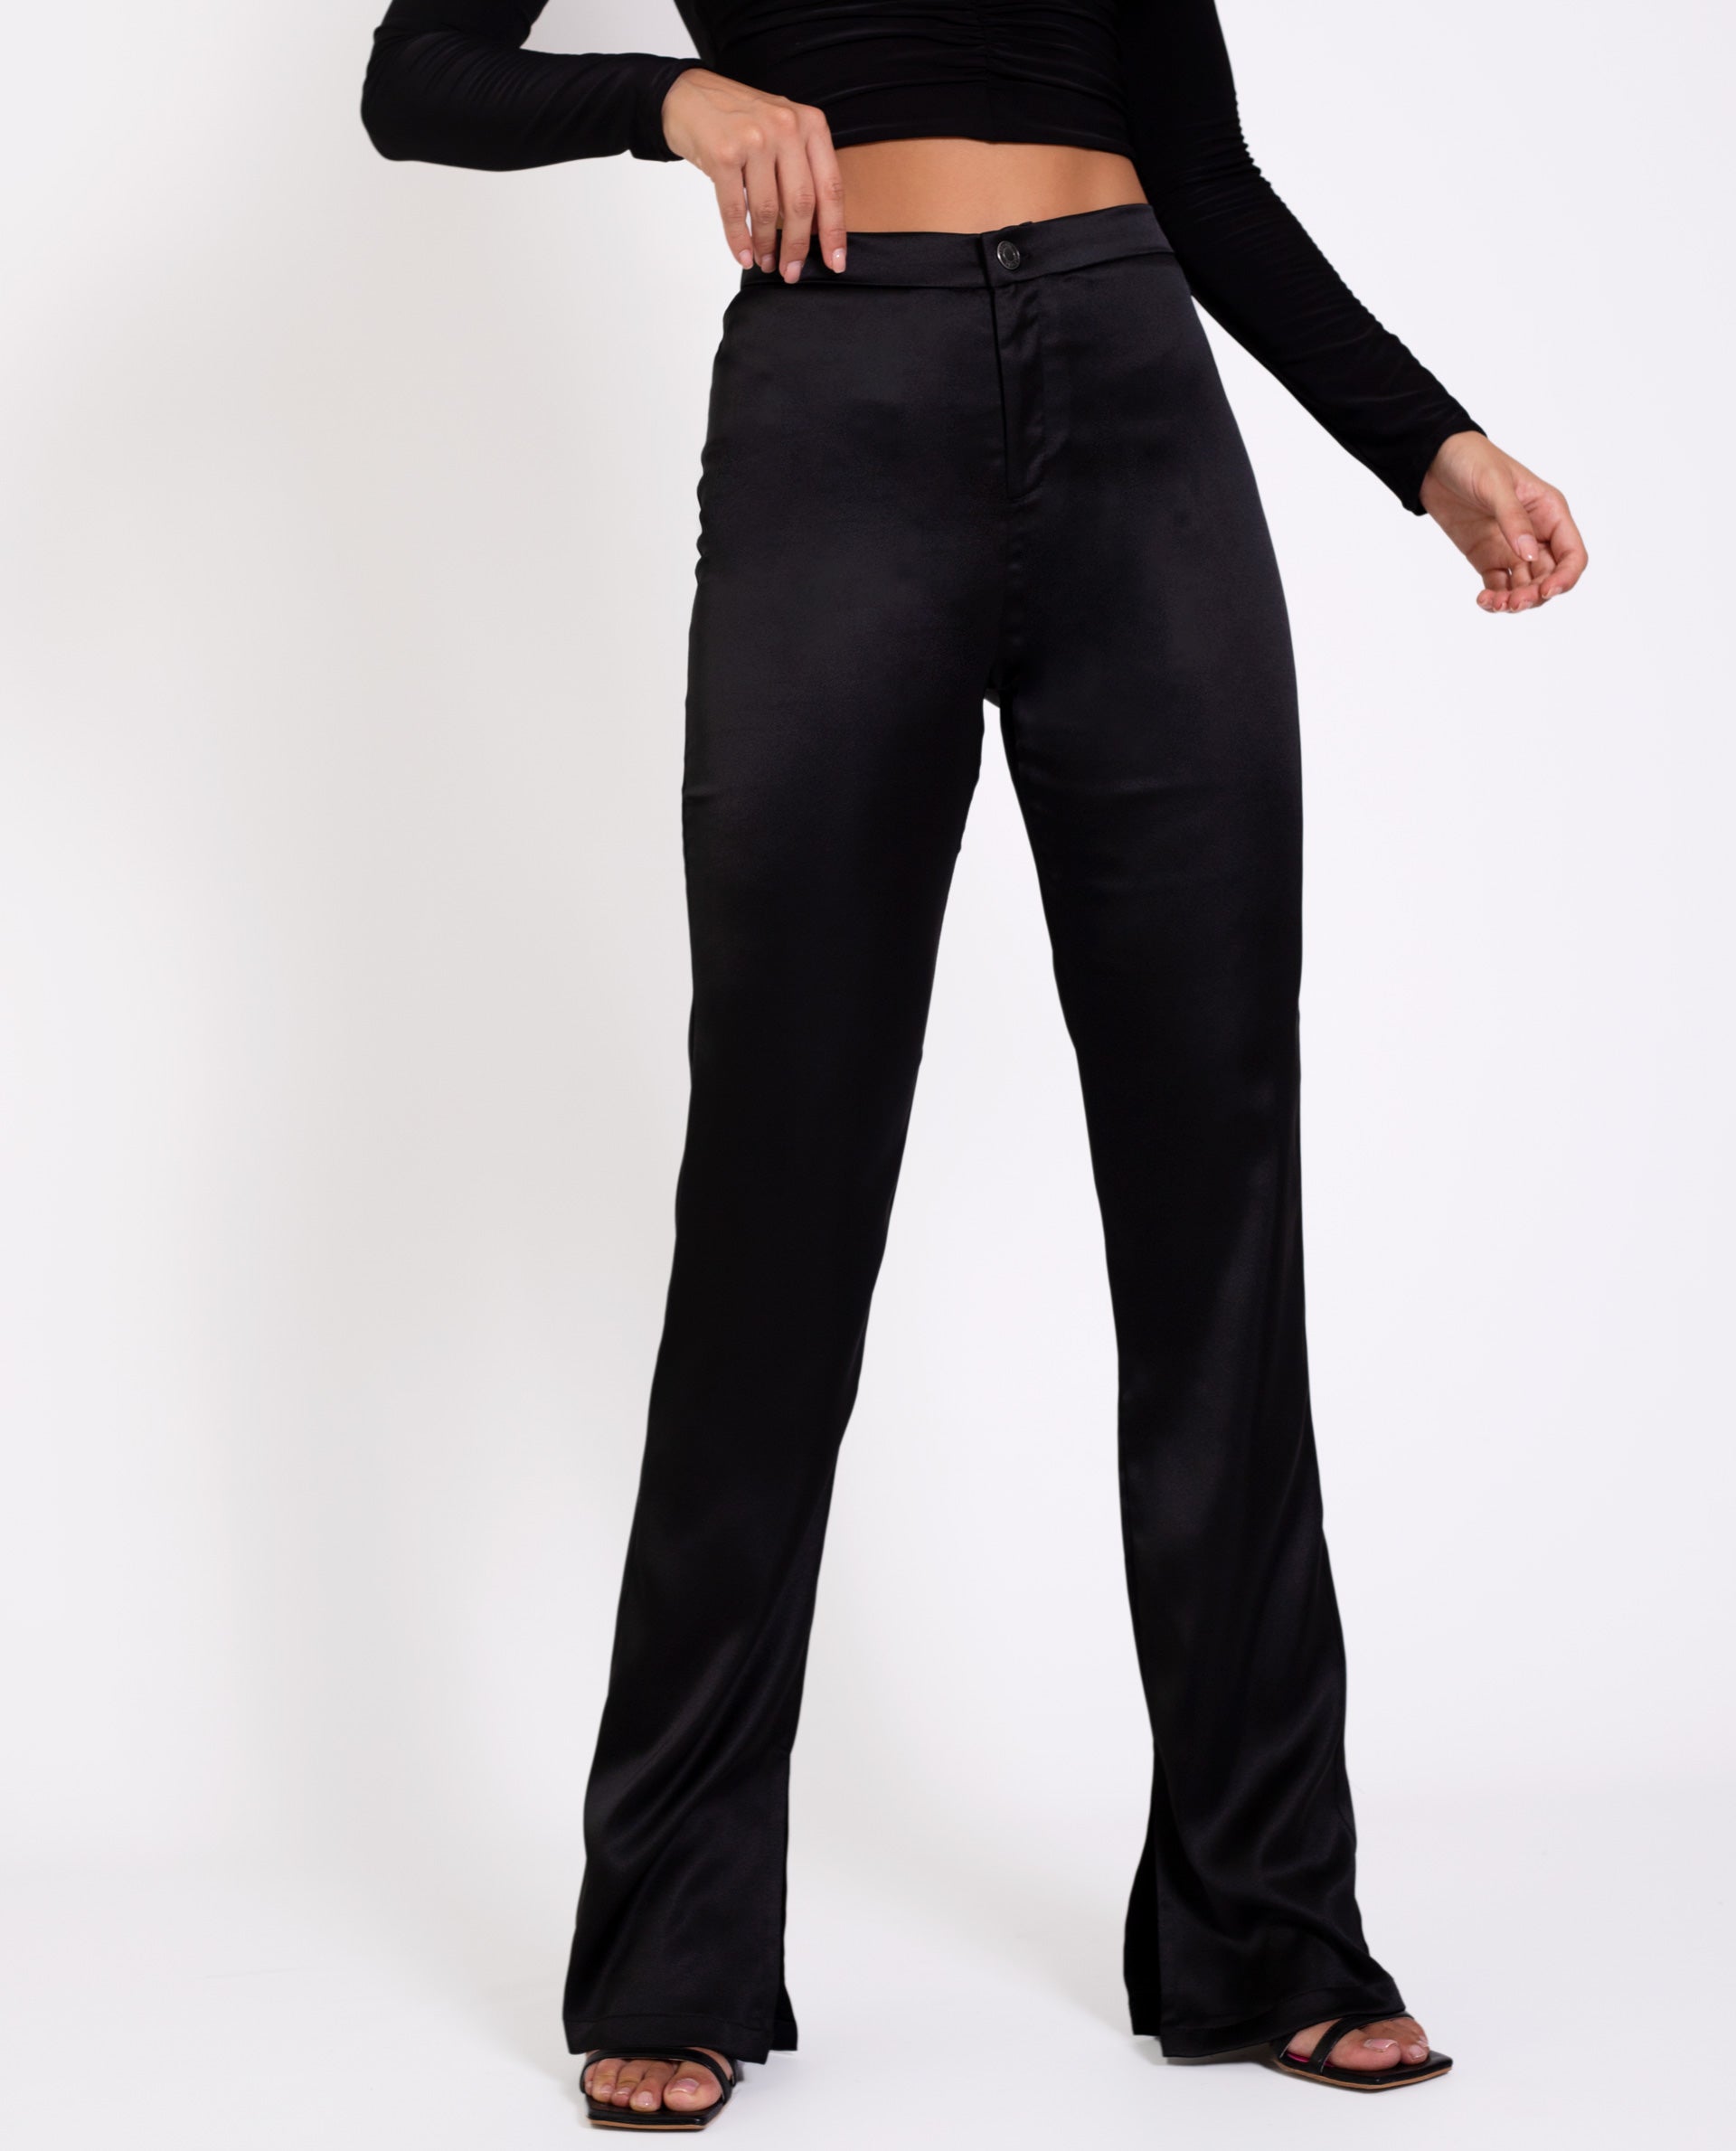 cepillo Buena voluntad pastel Women's Black Party Pants Bell Bell Collection THE-ARE